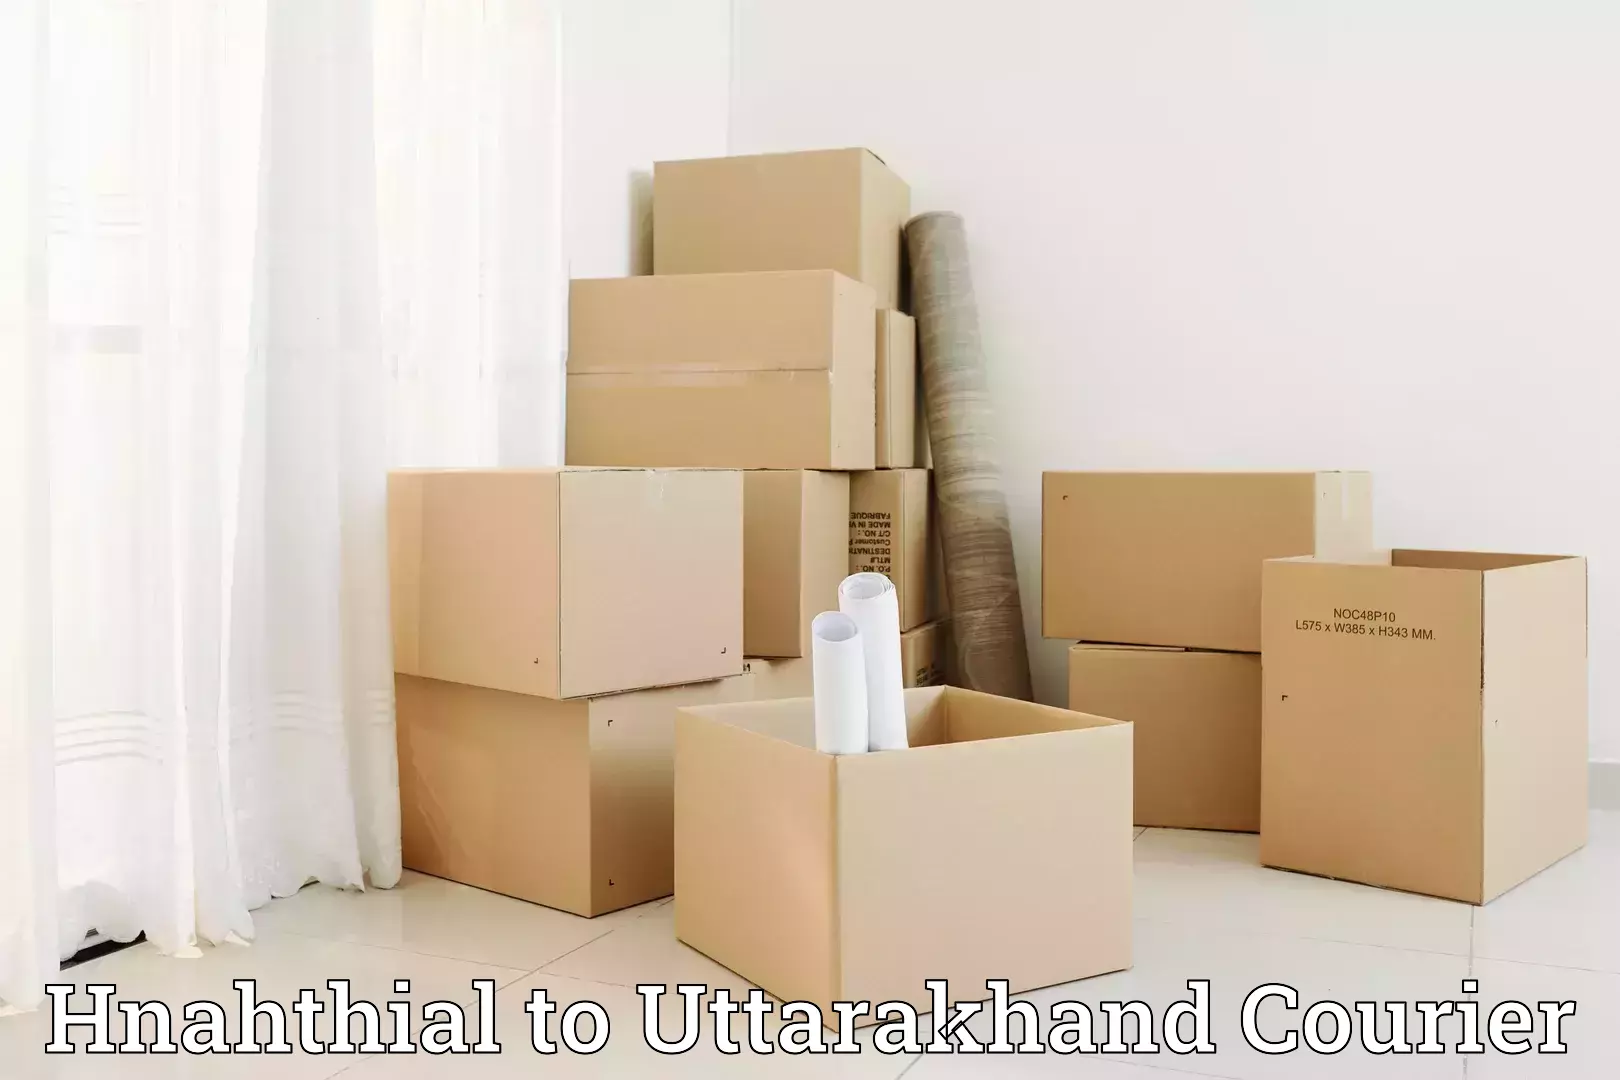 Household moving experts Hnahthial to Rudrapur